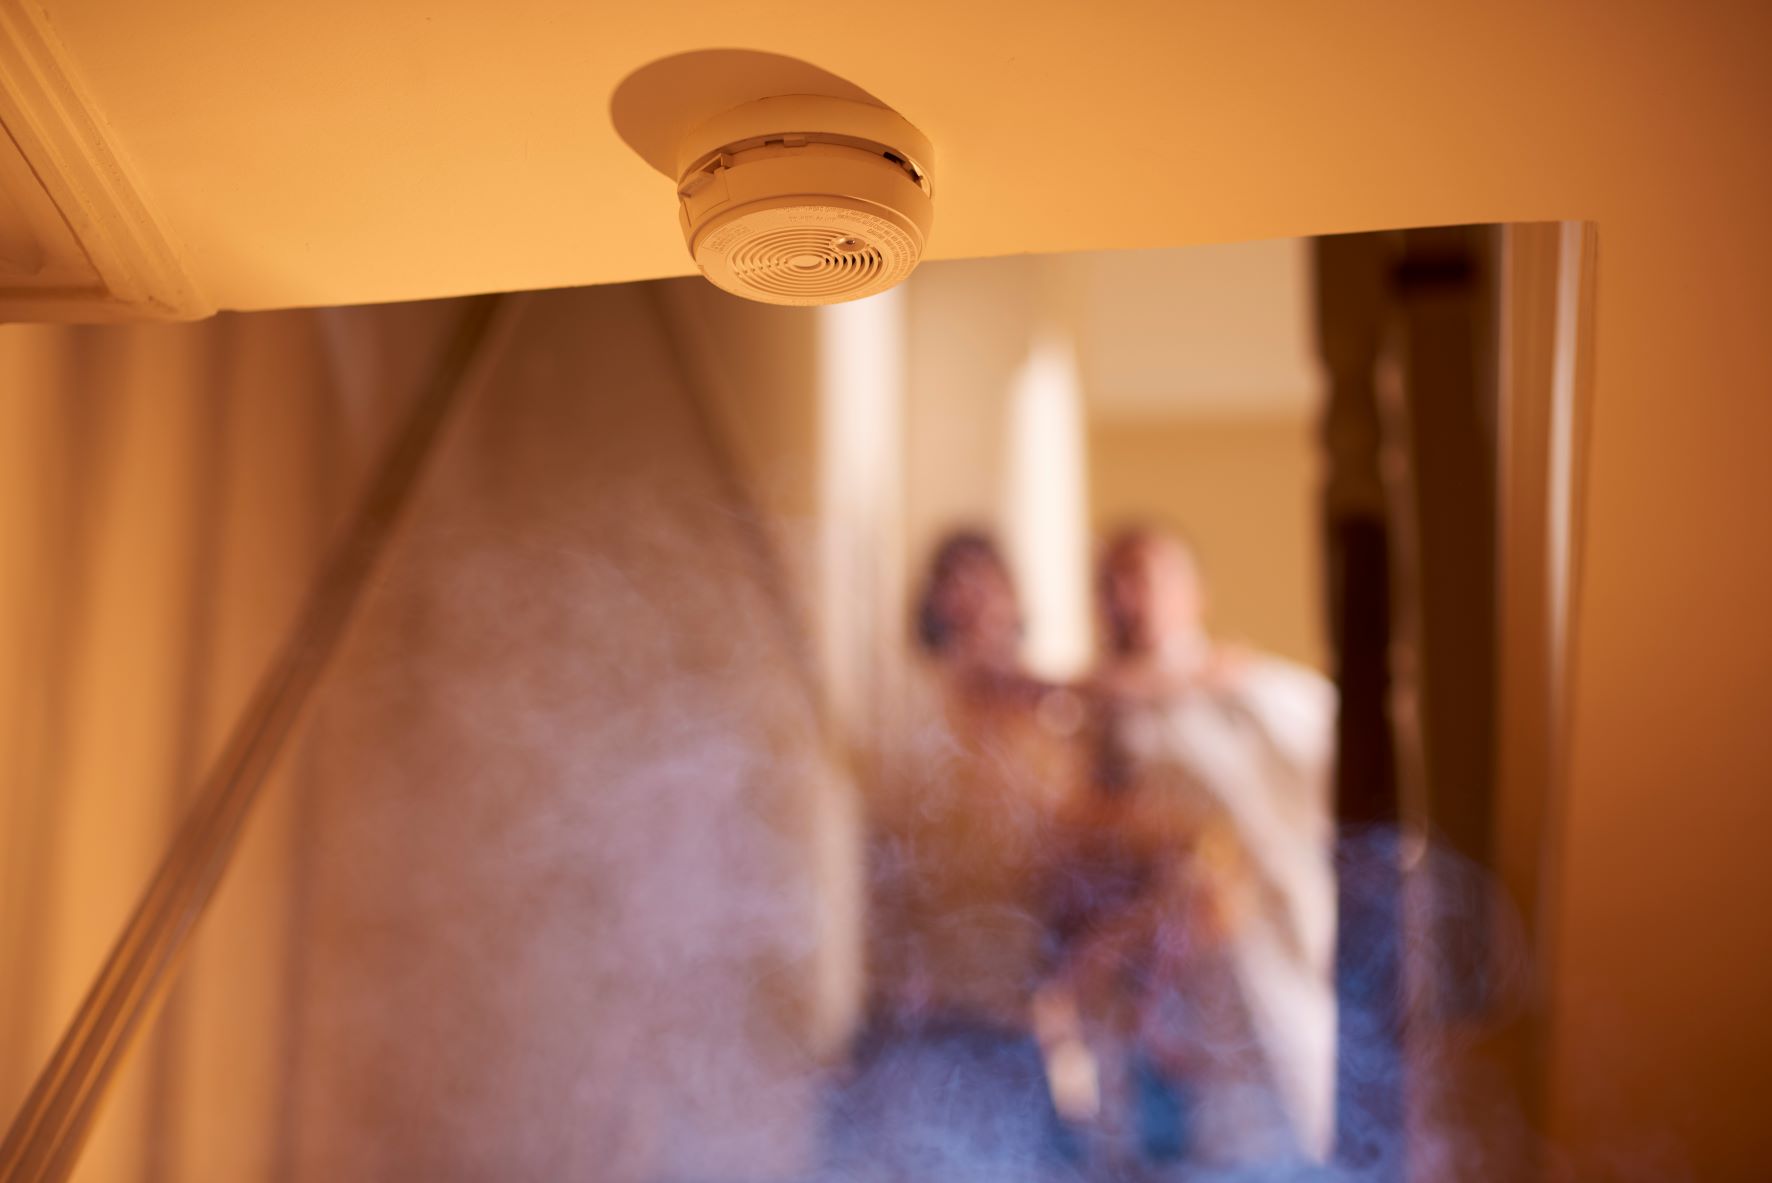 Your home may be less carbon-monoxide safe than you think